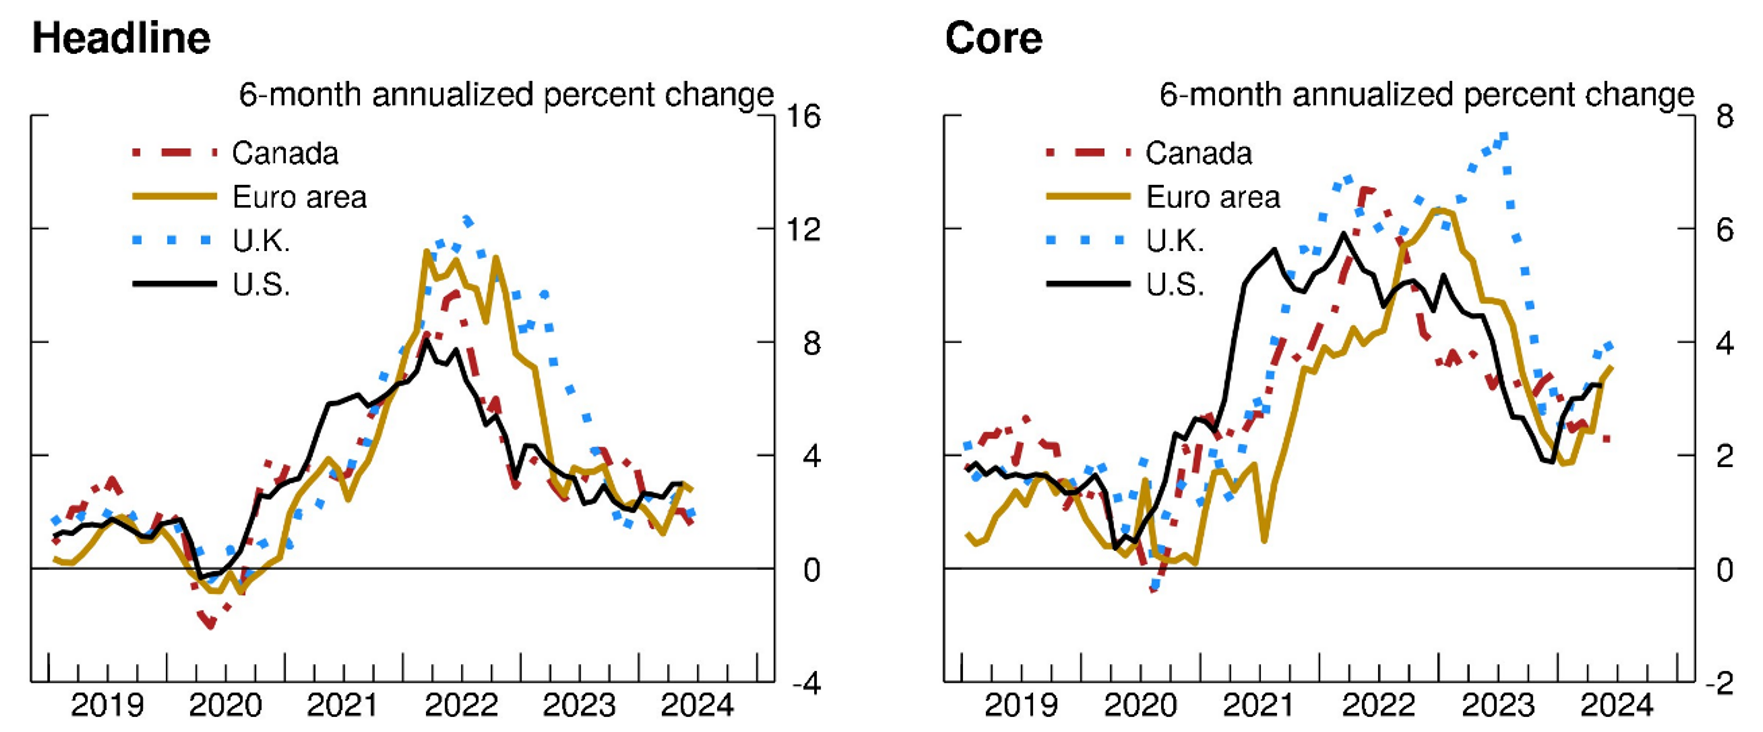 Figure 2. 6-month Inflation in Selected Advanced Economies. See accessible link for data.